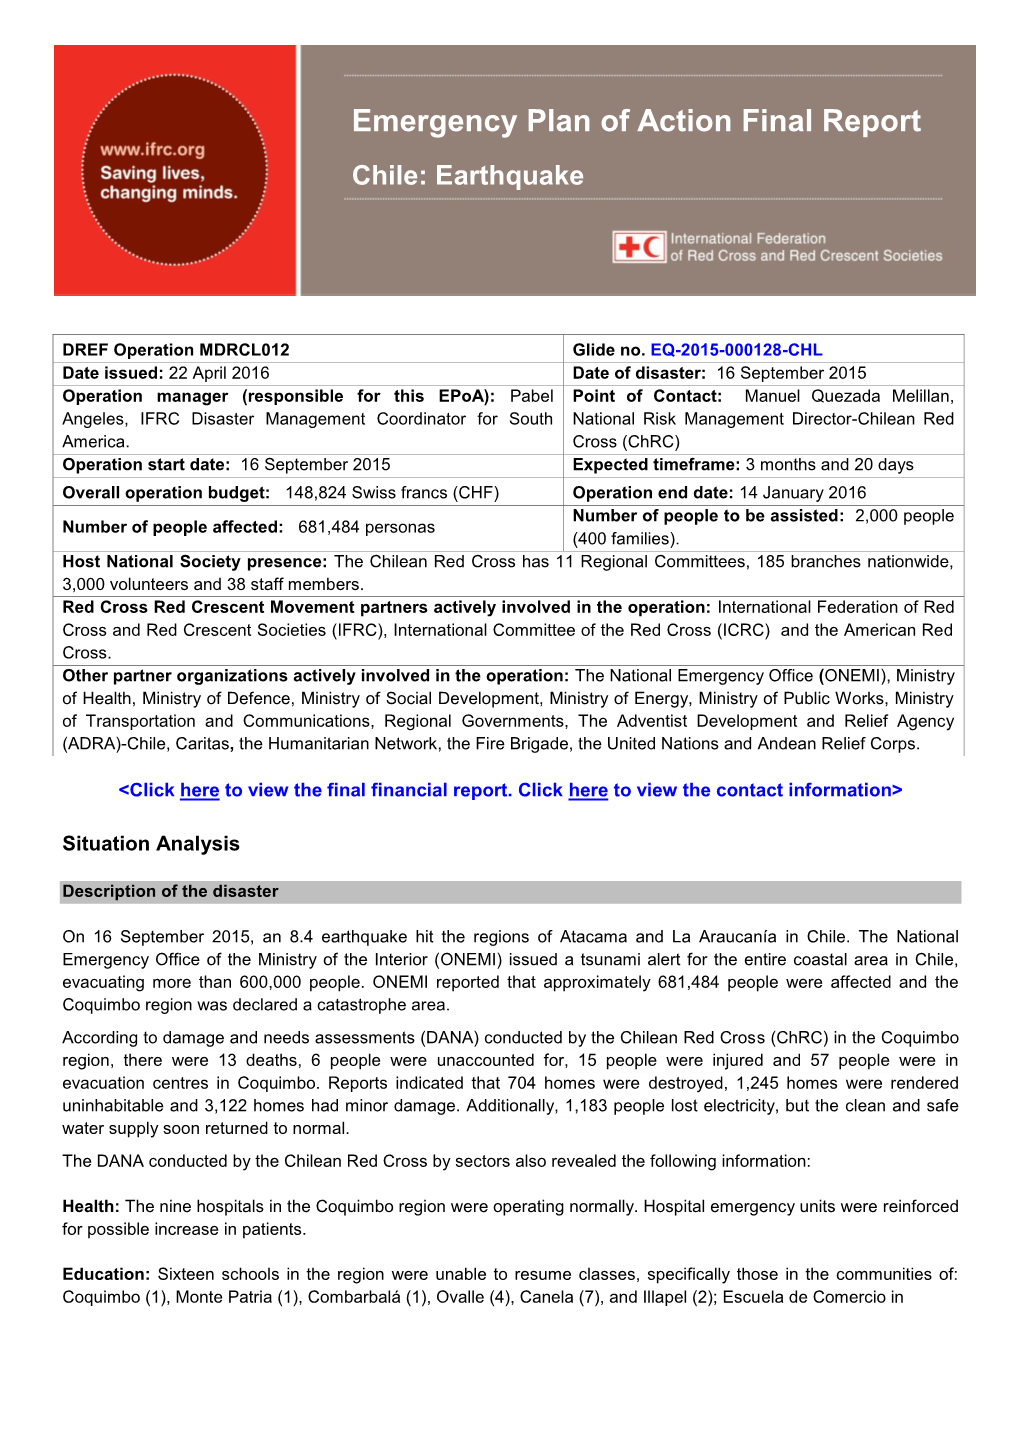 Emergency Plan of Action Final Report Chile: Earthquake